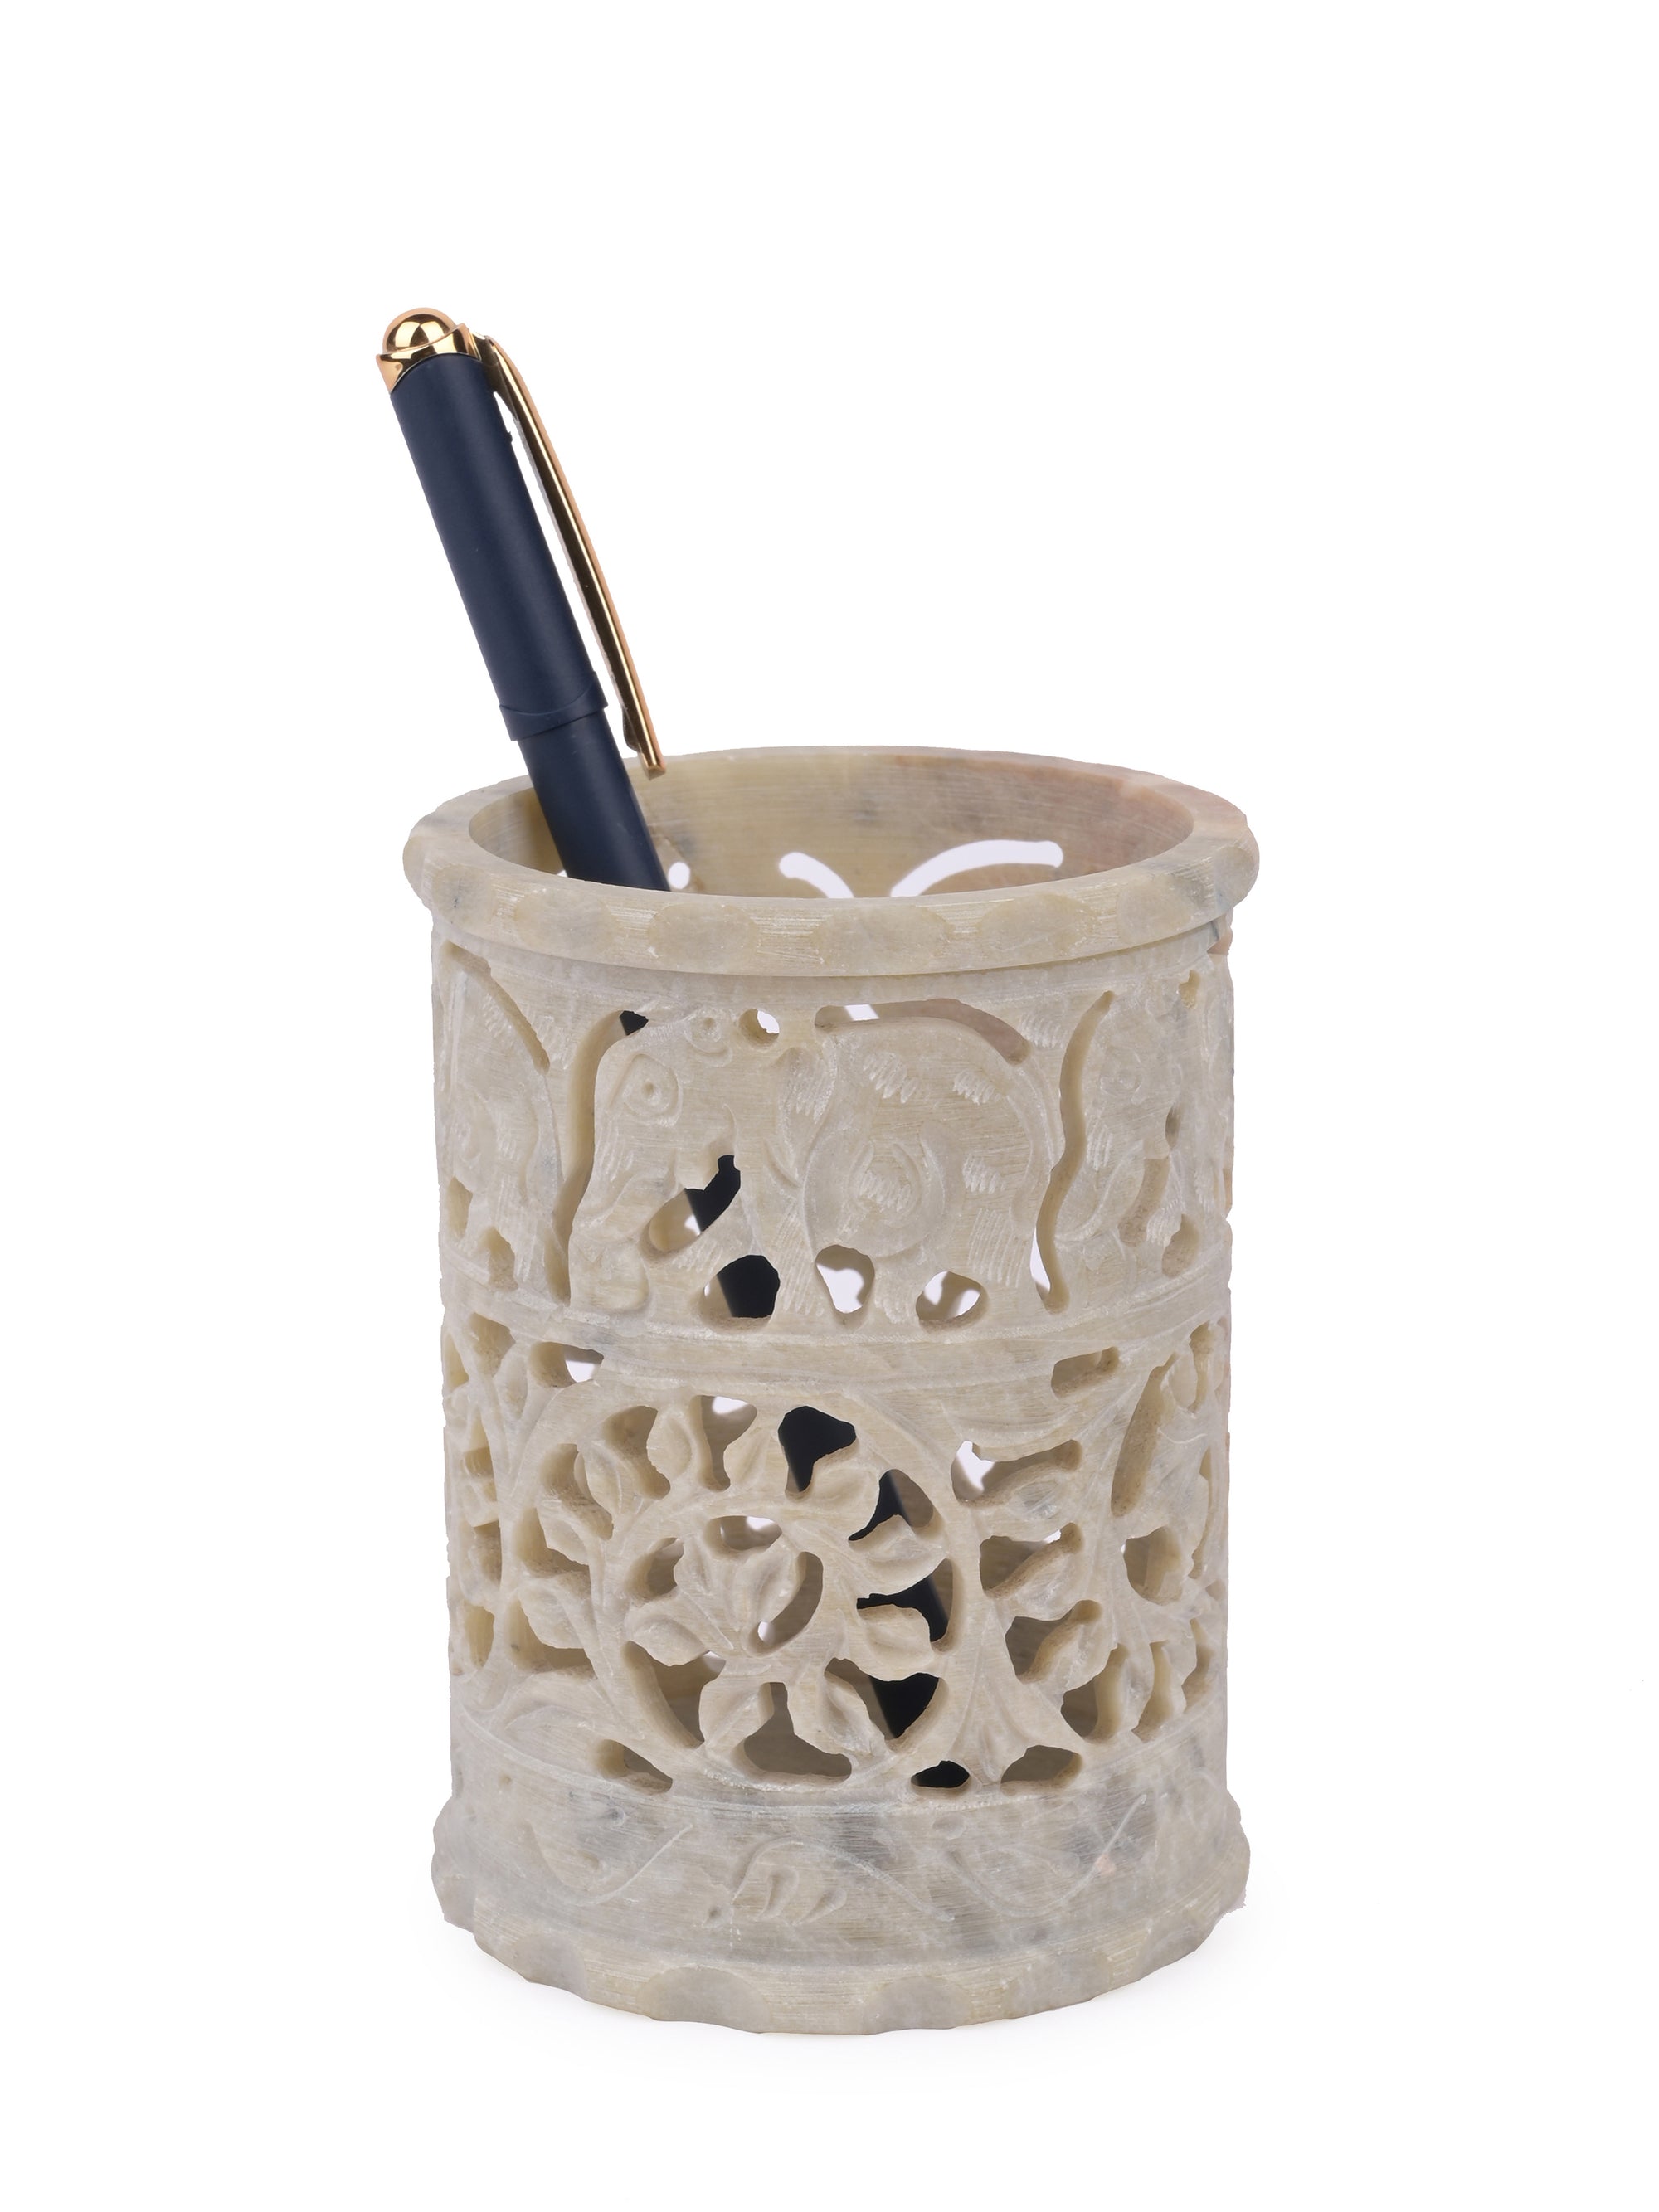 Elephant design stone crafted Pen / Pencil holder in Beige color - The Heritage Artifacts